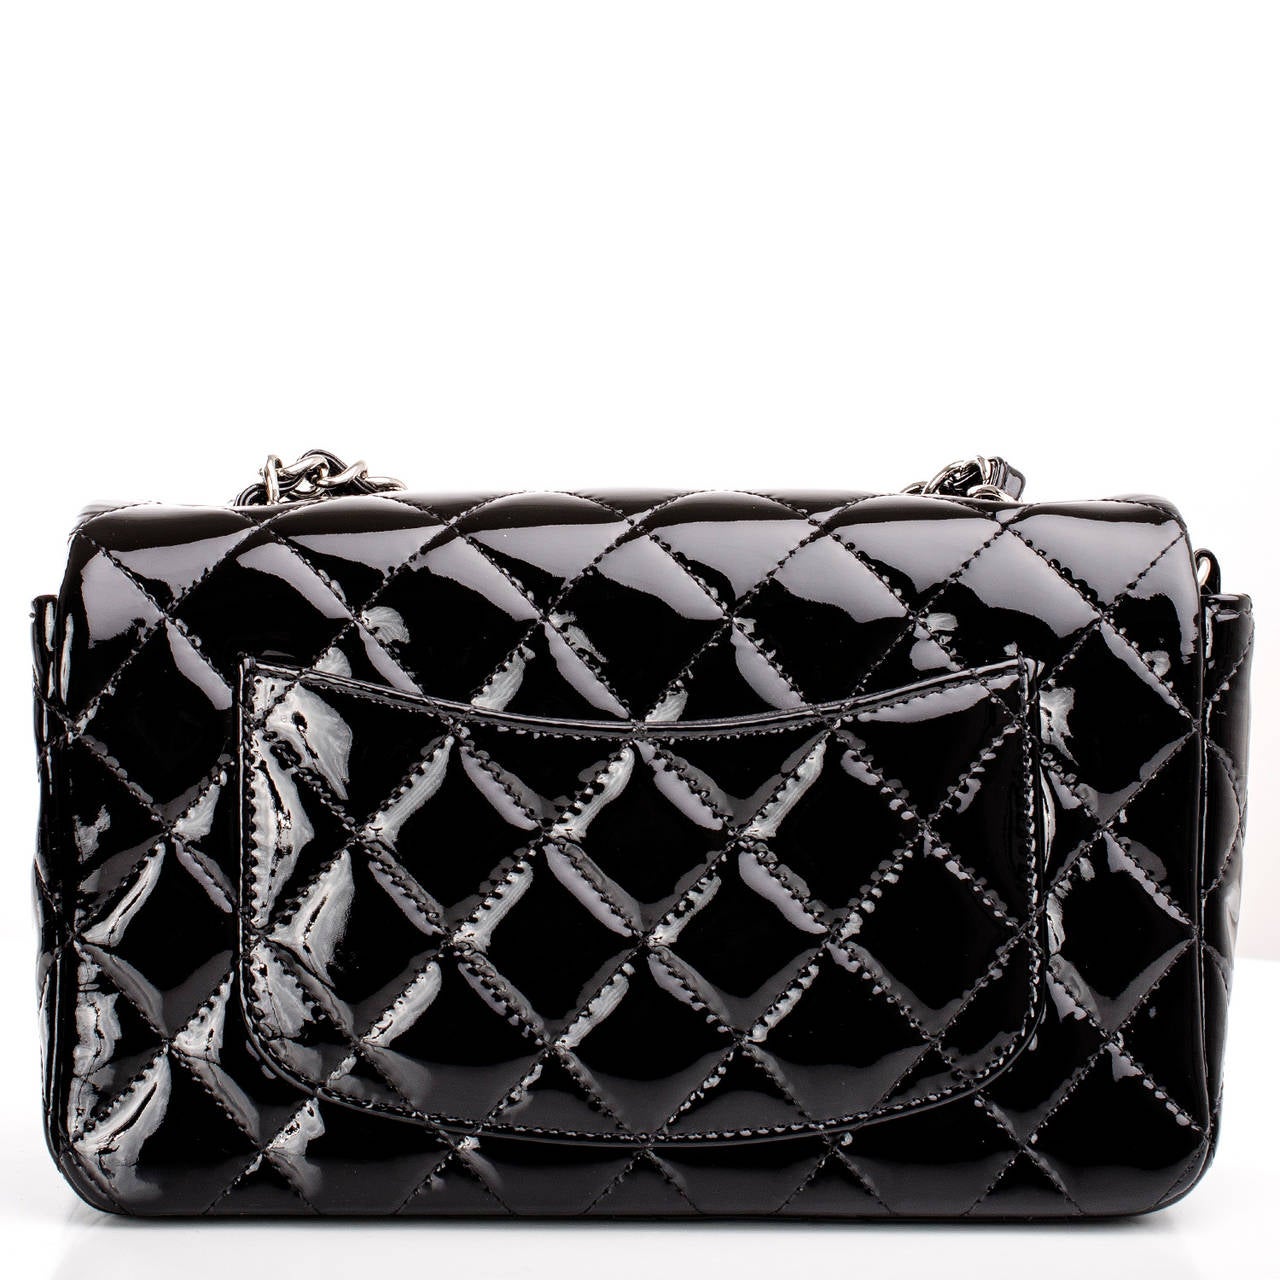 Chanel black Small Classic flap bag in quilted patent leather with silver tone hardware.

This flap bag in classic black quilted patent is the new small size -- compact and sophisticated with greater room than the crossbody mini or WOC. Worn on